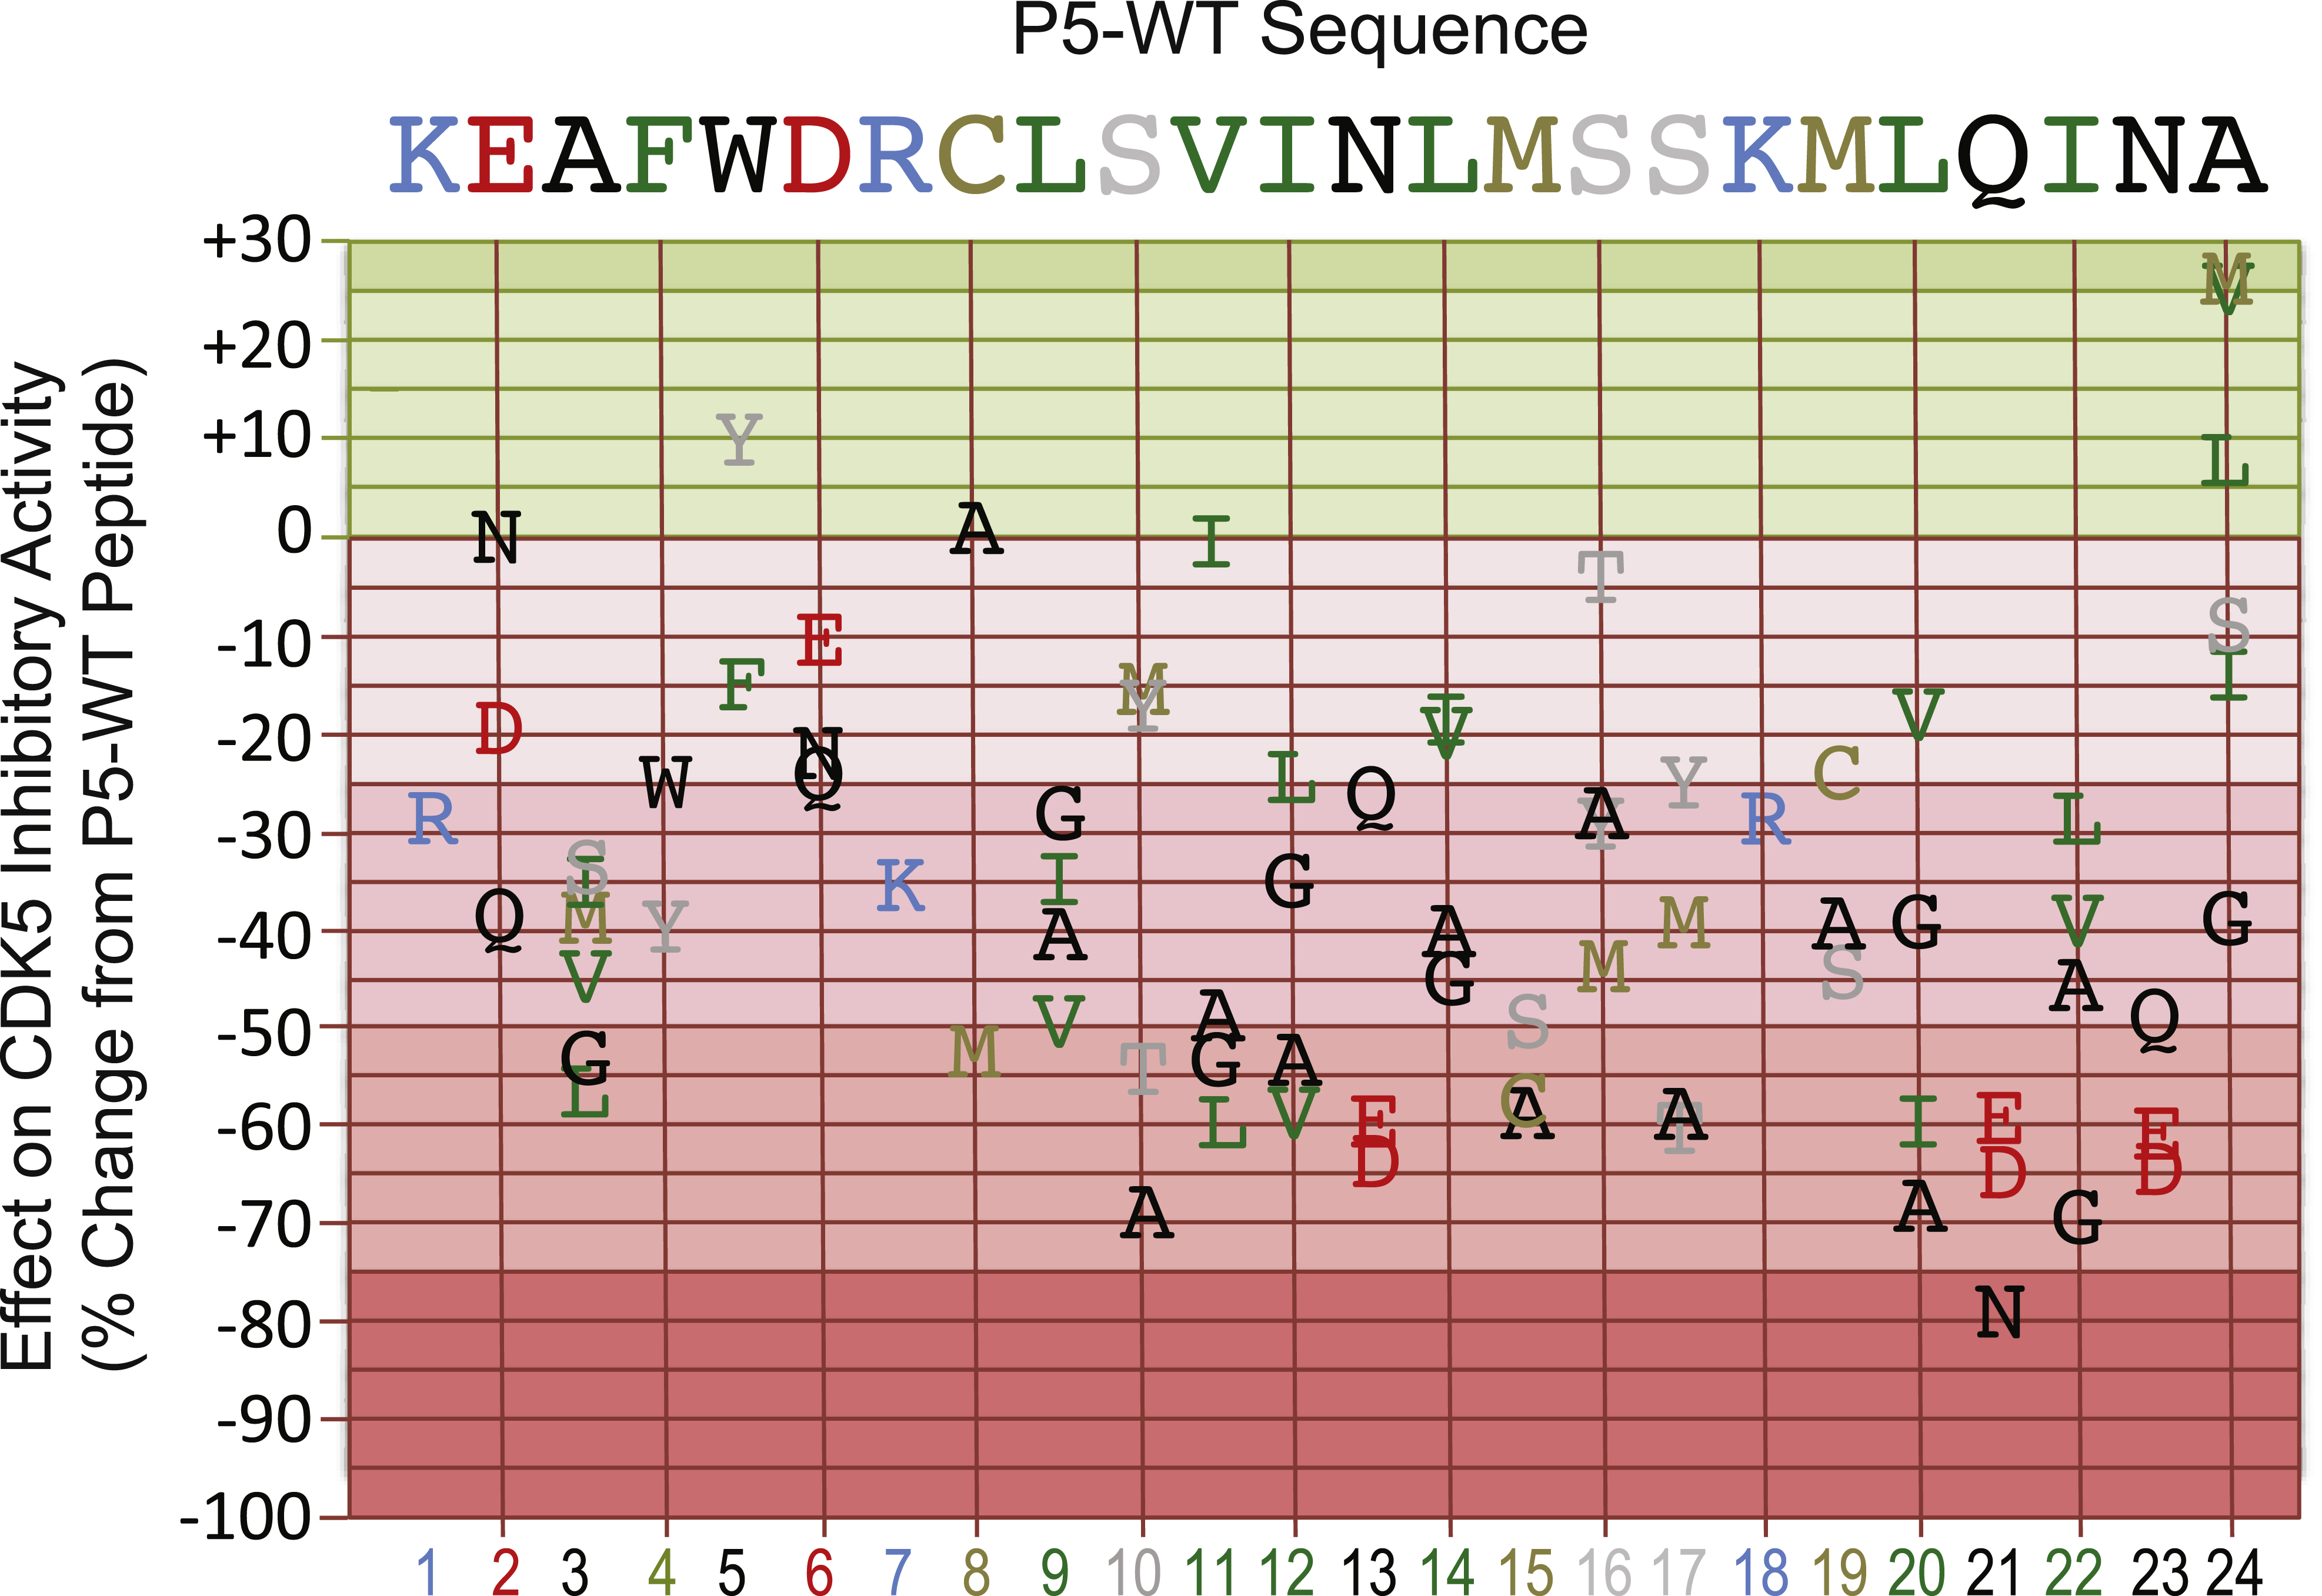 Mutational analysis of the p5-WT peptide to define the critical amino acids for its inhibitory action on CDK5 phosphotransferase activity. Replacement amino acids are graphed according to their actions on CDK5 kinase activity as a percentage of the effect of the parent p5-WT peptide, which served as a control. Single letter designations are used for each amino acid and these are colored in part according to their charge and hydrophobicity. The corresponding amino acid residue positions are shown in the bottom X-axis.